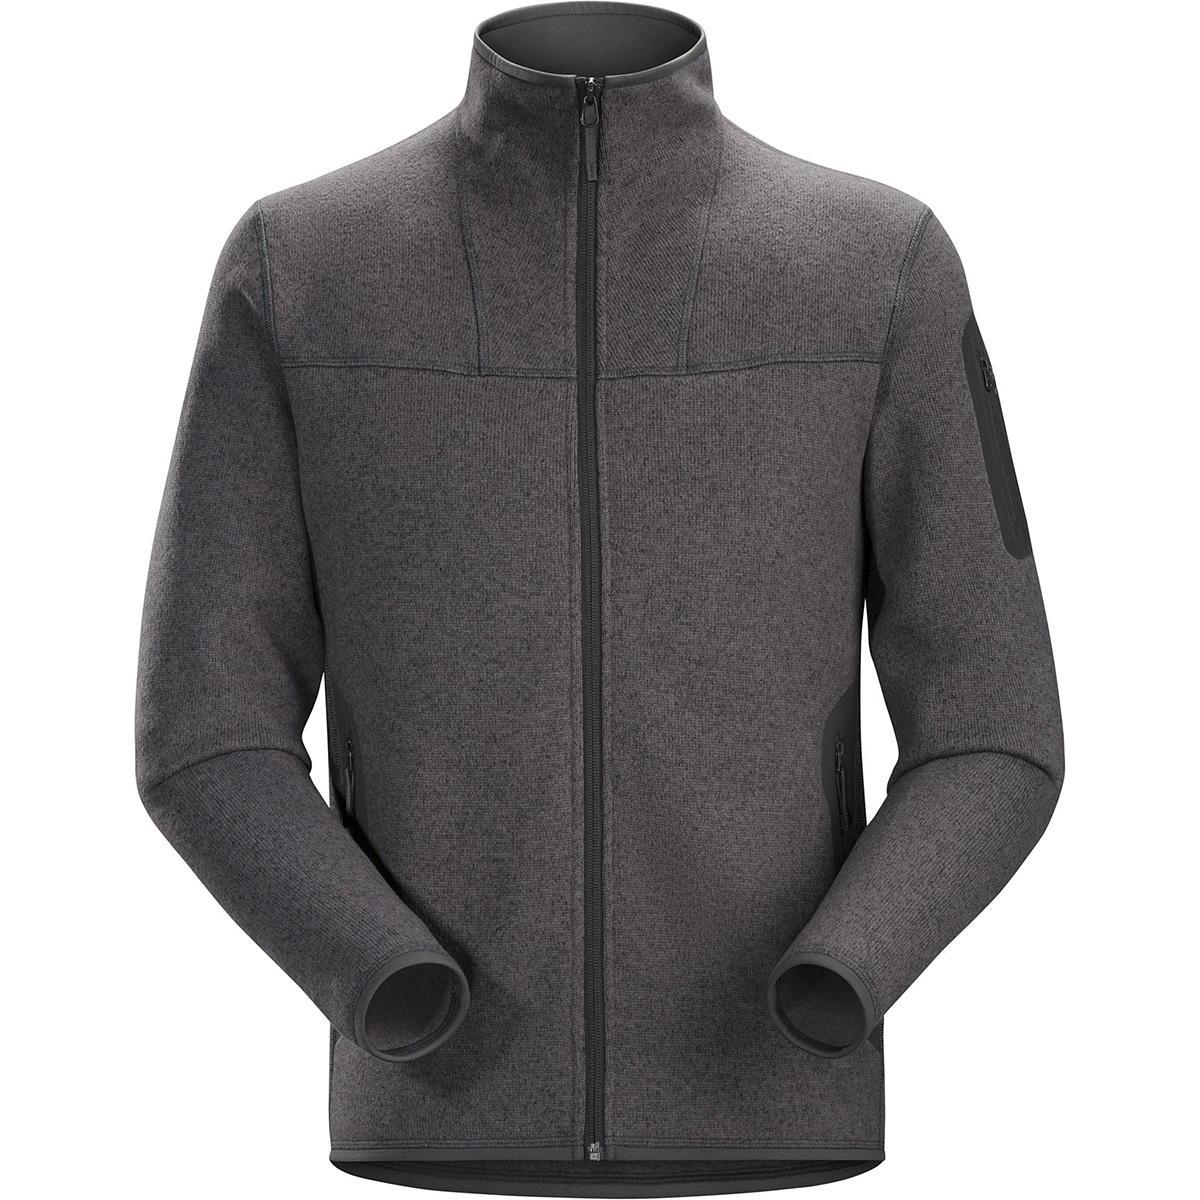 Arc'teryx Covert Cardigan, men's, Spring 2019 colors of discontinued ...